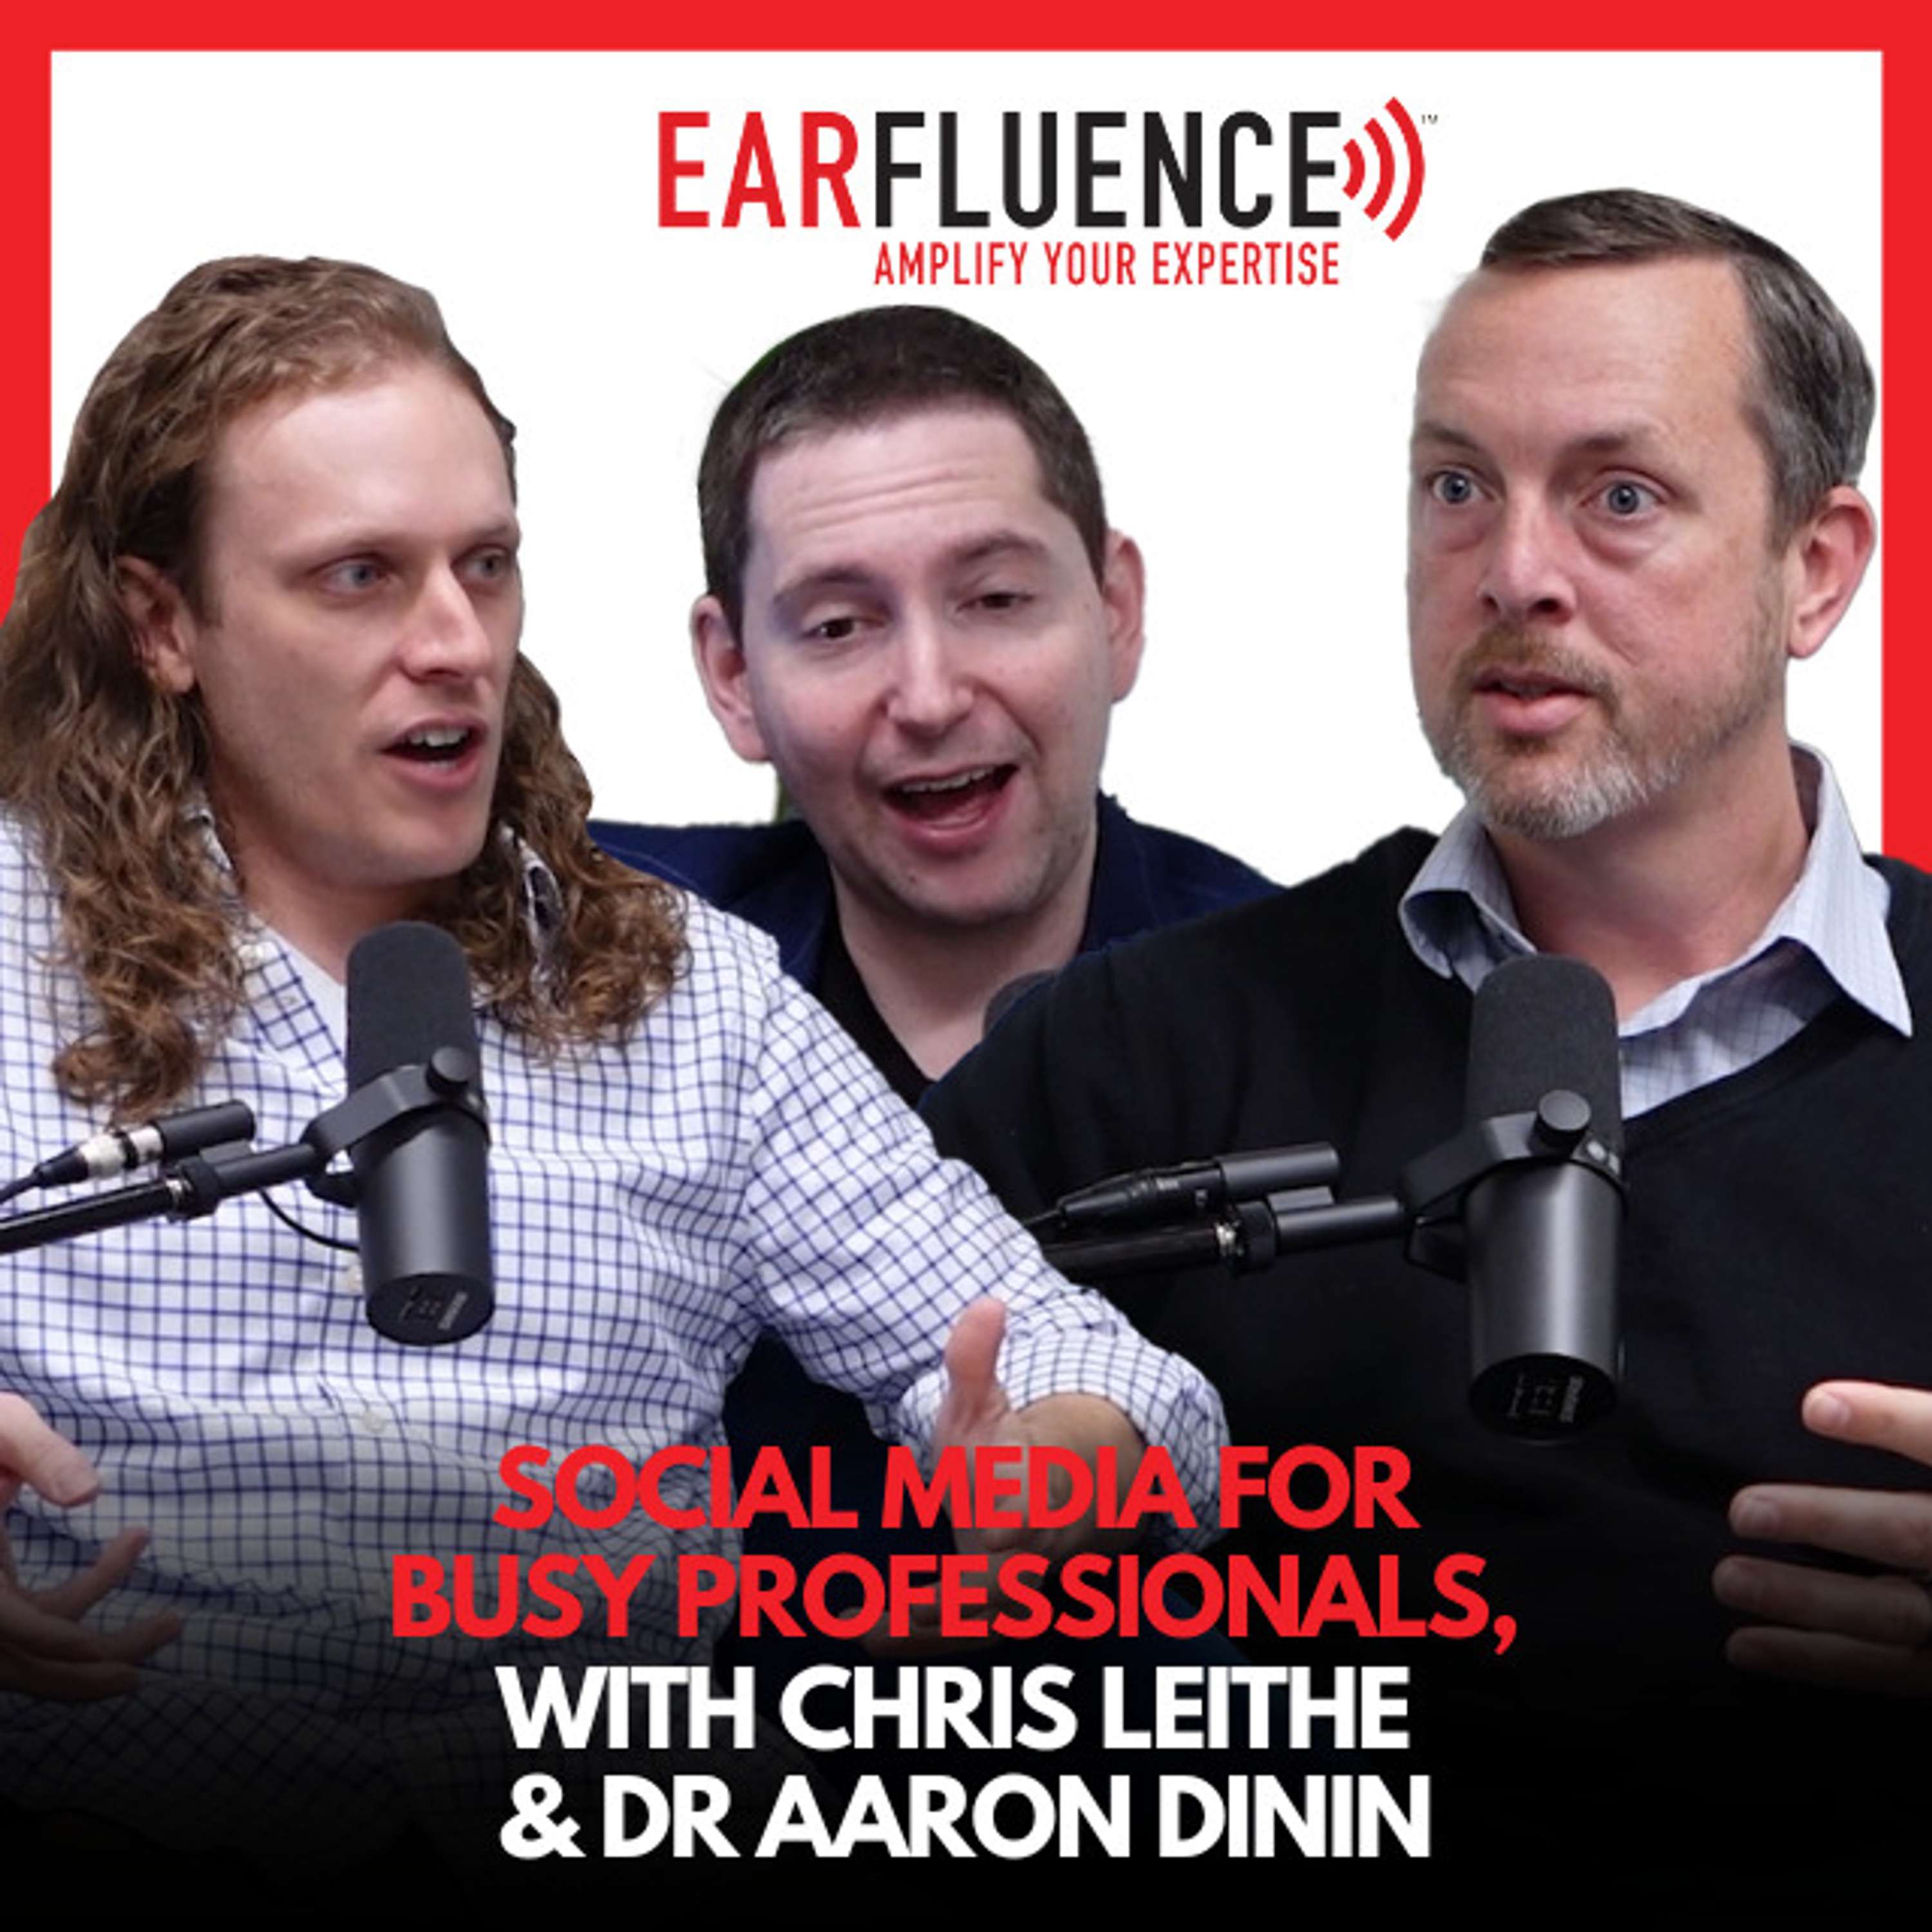 Social Media for Busy Professionals, with Chris Leithe and Dr. Aaron Dinin